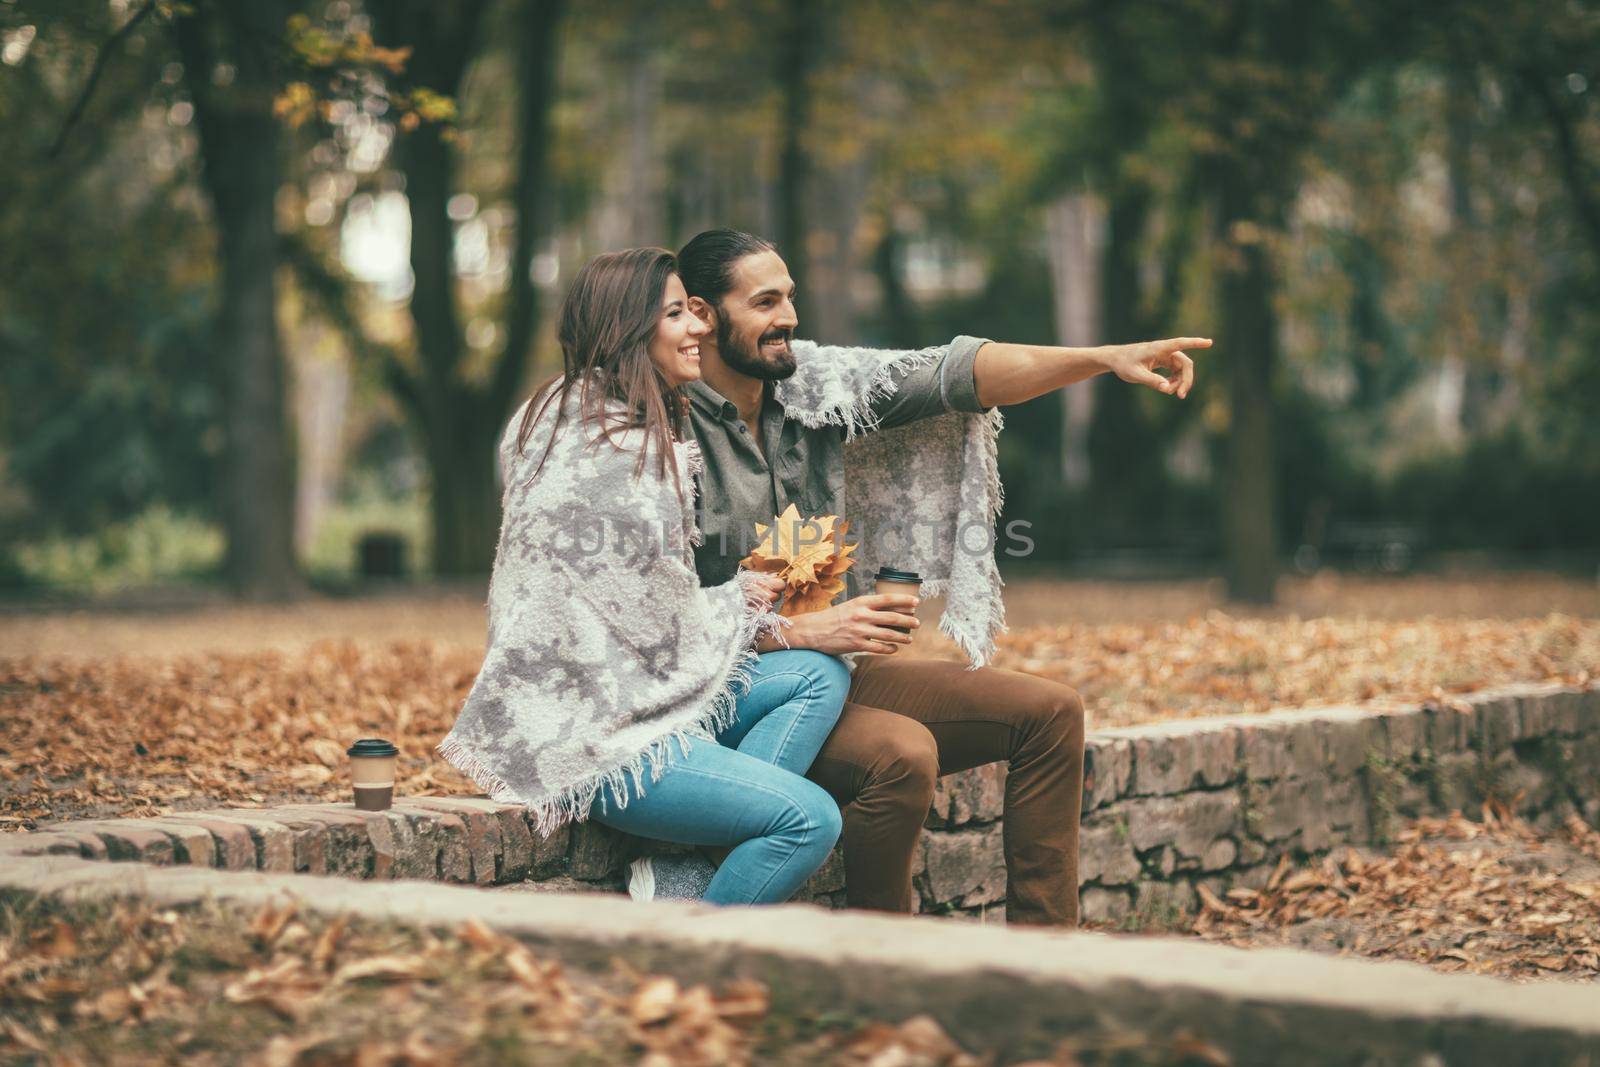 Beautiful smiling couple enjoying in sunny city park in autumn colors looking each other. They are having fun with yellow leaves.